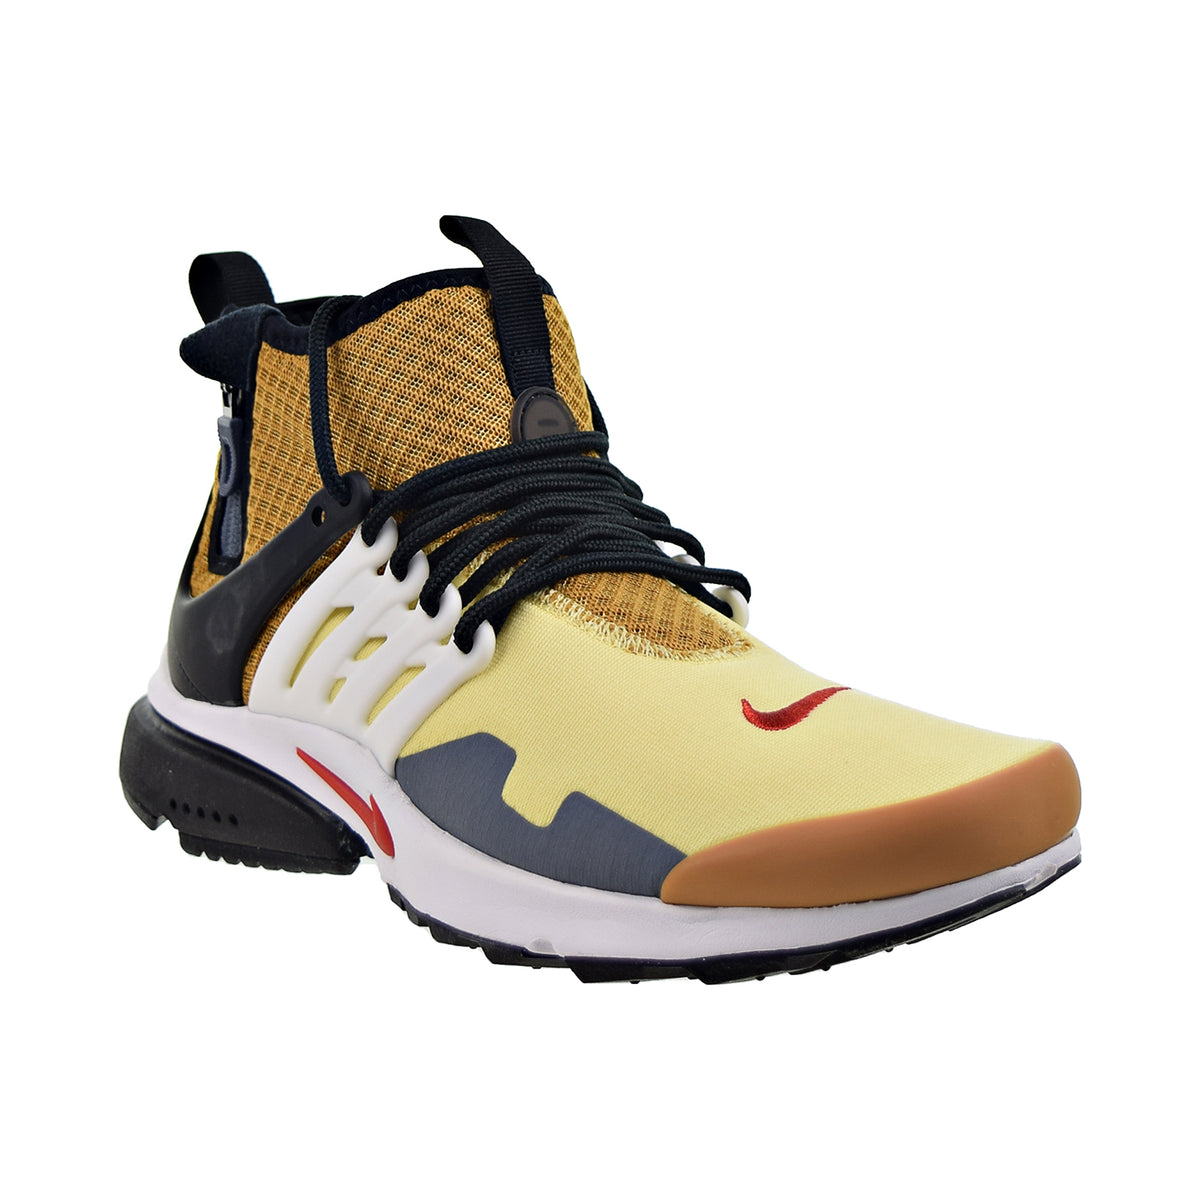 Nike Presto Mid Utility Men's Shoes Bicycle Yellow-Wheat-Team Best